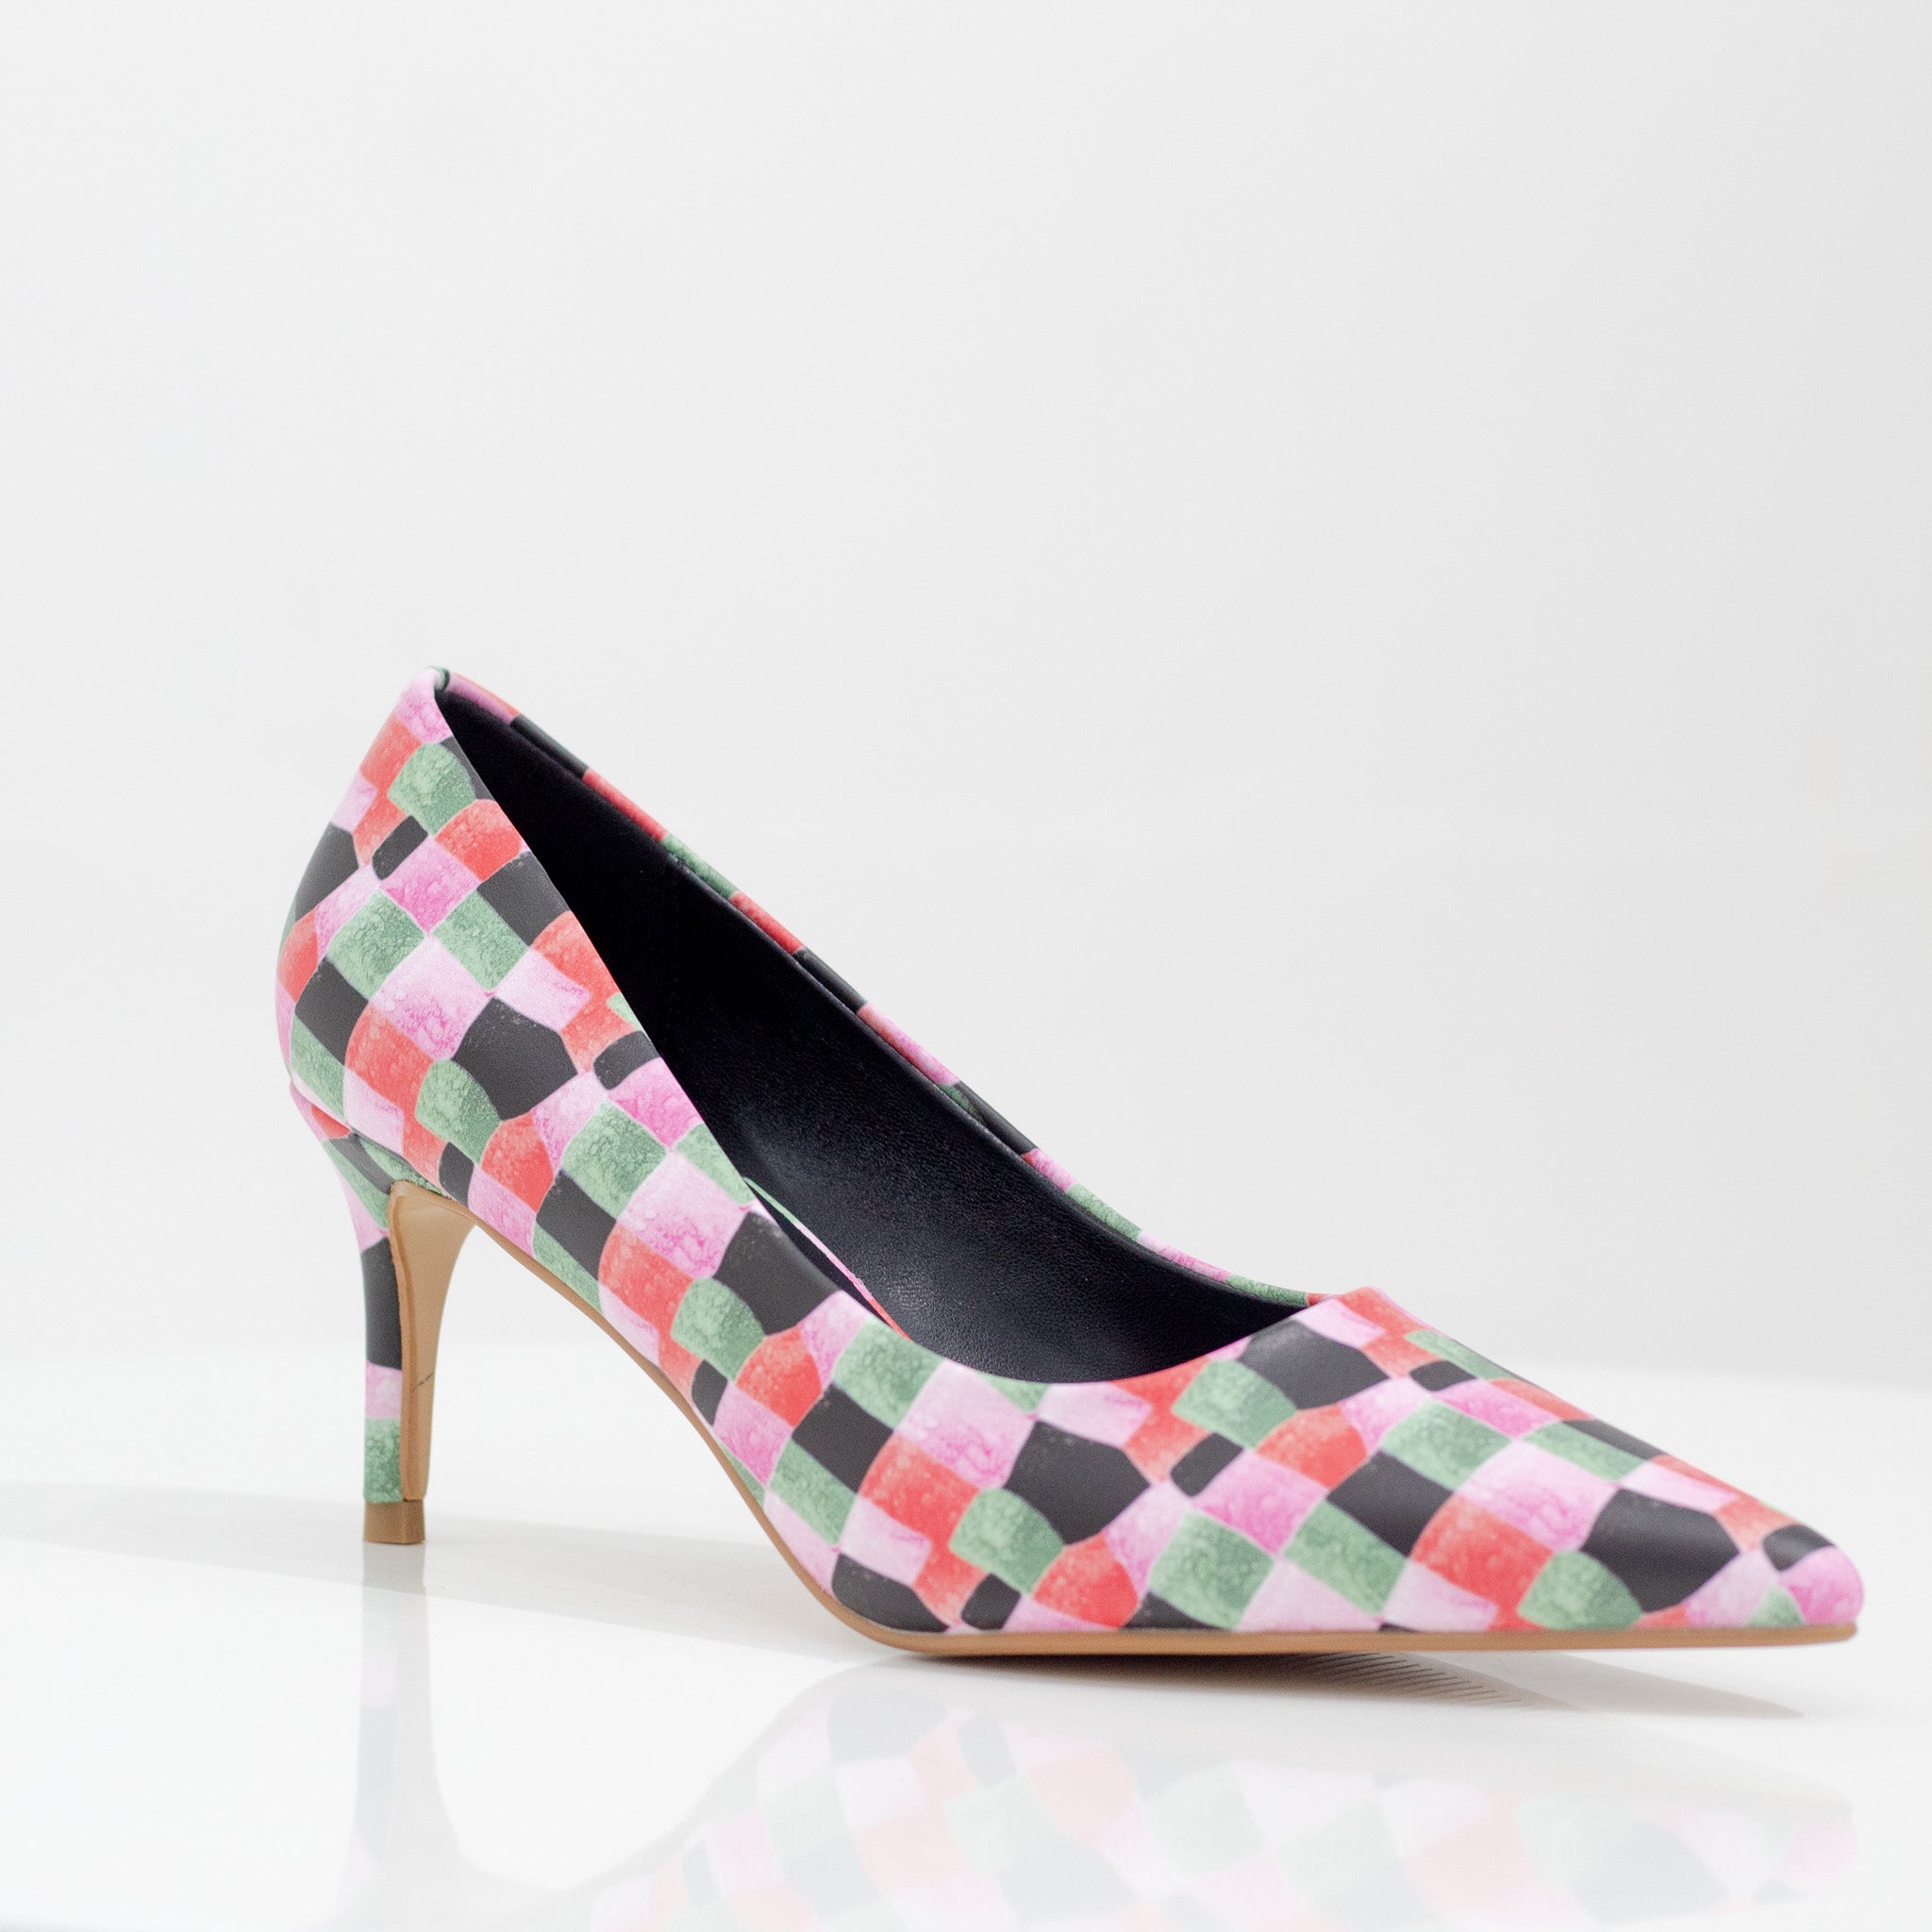 Banu 7cm heel  multi colored pointy court